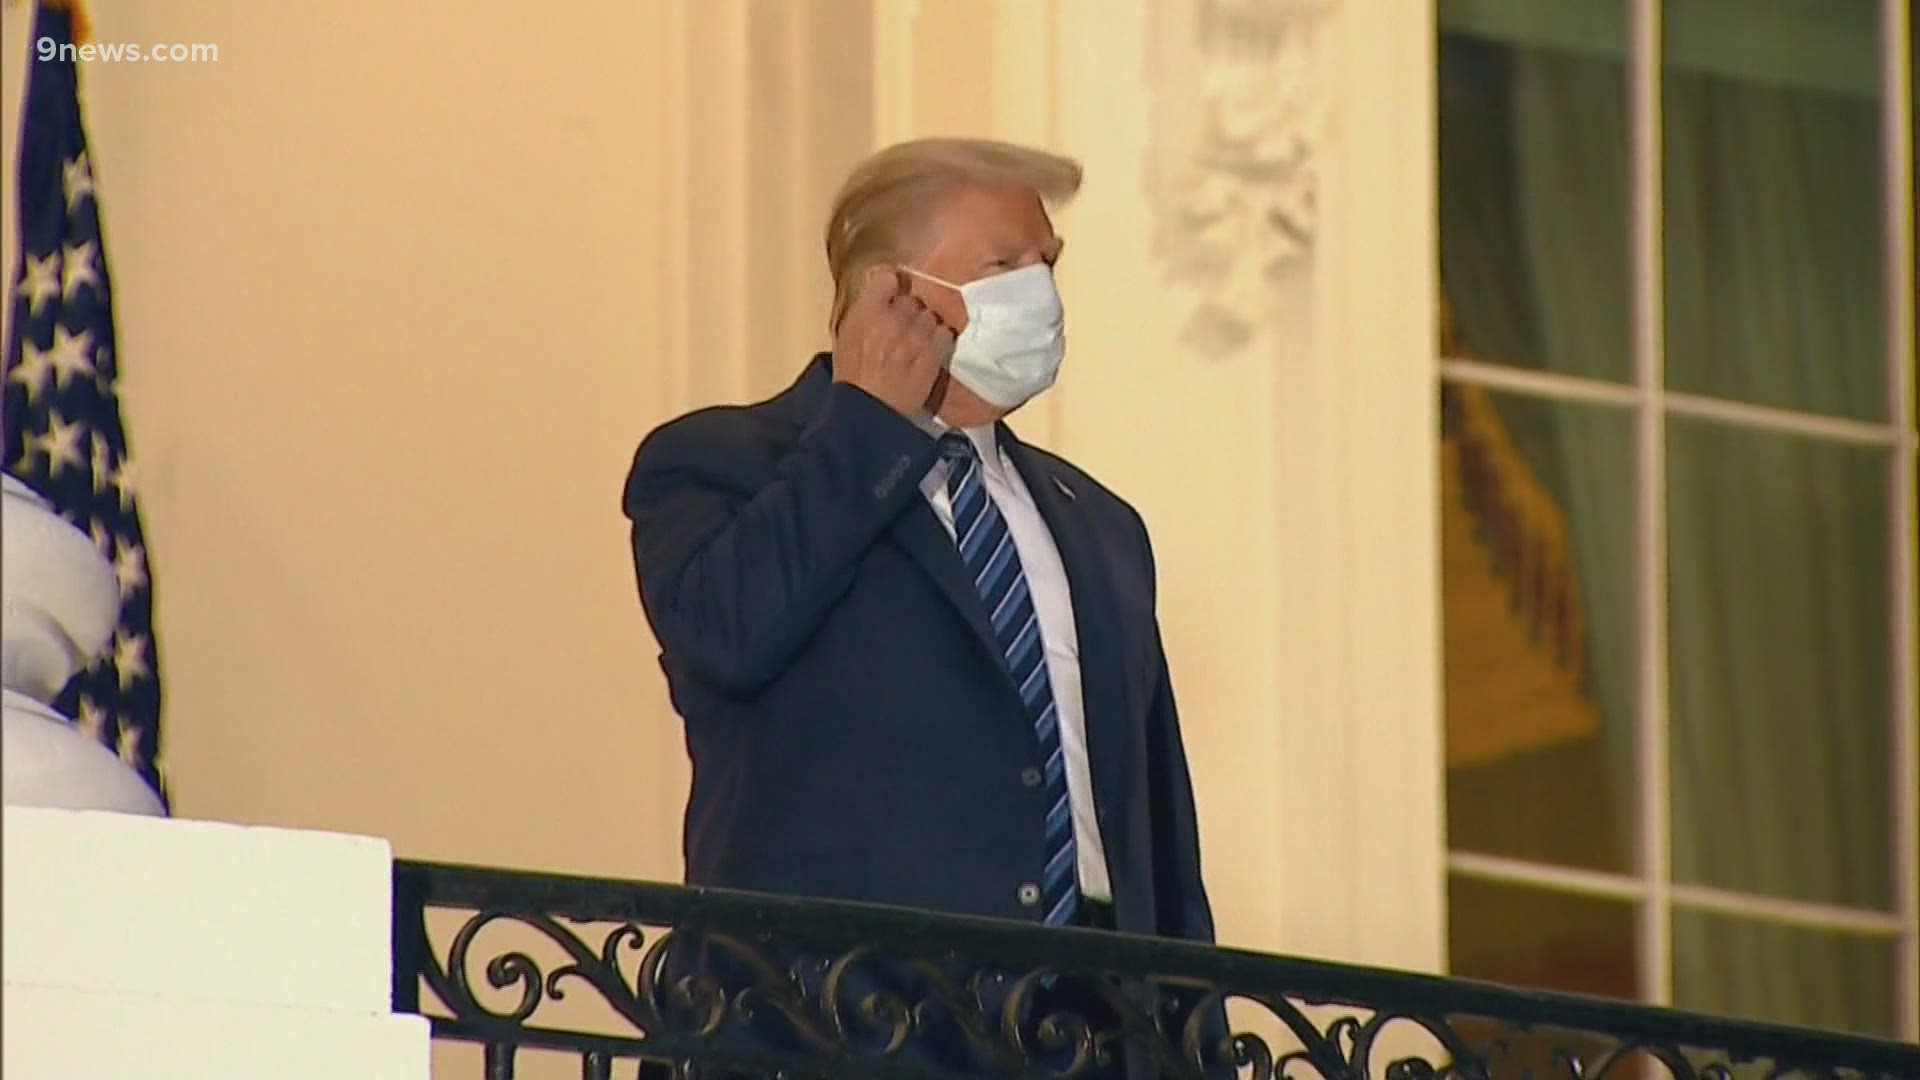 Landing Monday night at the White House on Marine One, Trump gingerly climbed the South Portico steps, removed his mask and declared, “I feel good.”